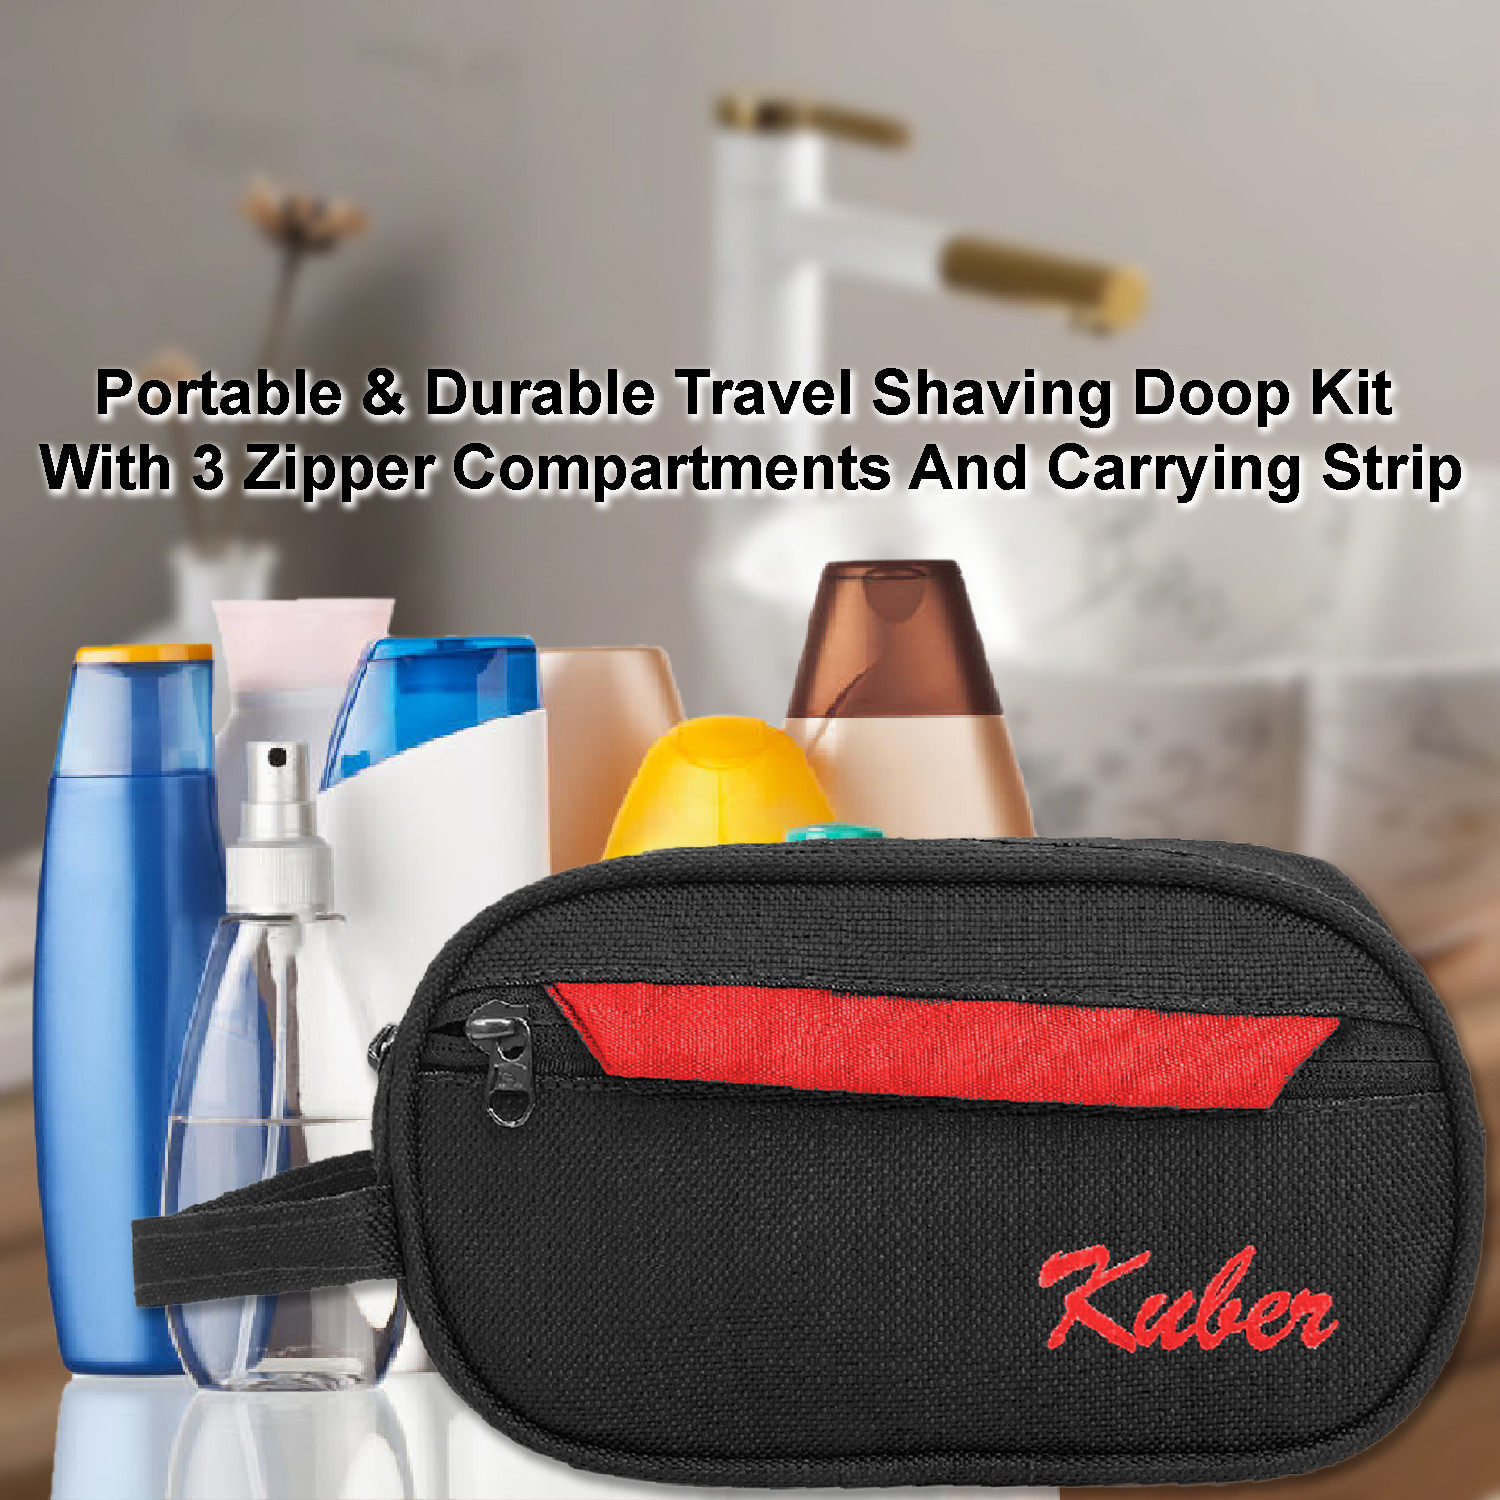 Kuber Industries Canvas Toiletry Organizer|Portable & Durable Carrying Strip Travel Shaving Doop Kit With 2 Zipper ComparMants And Fornt Zipper (Black)